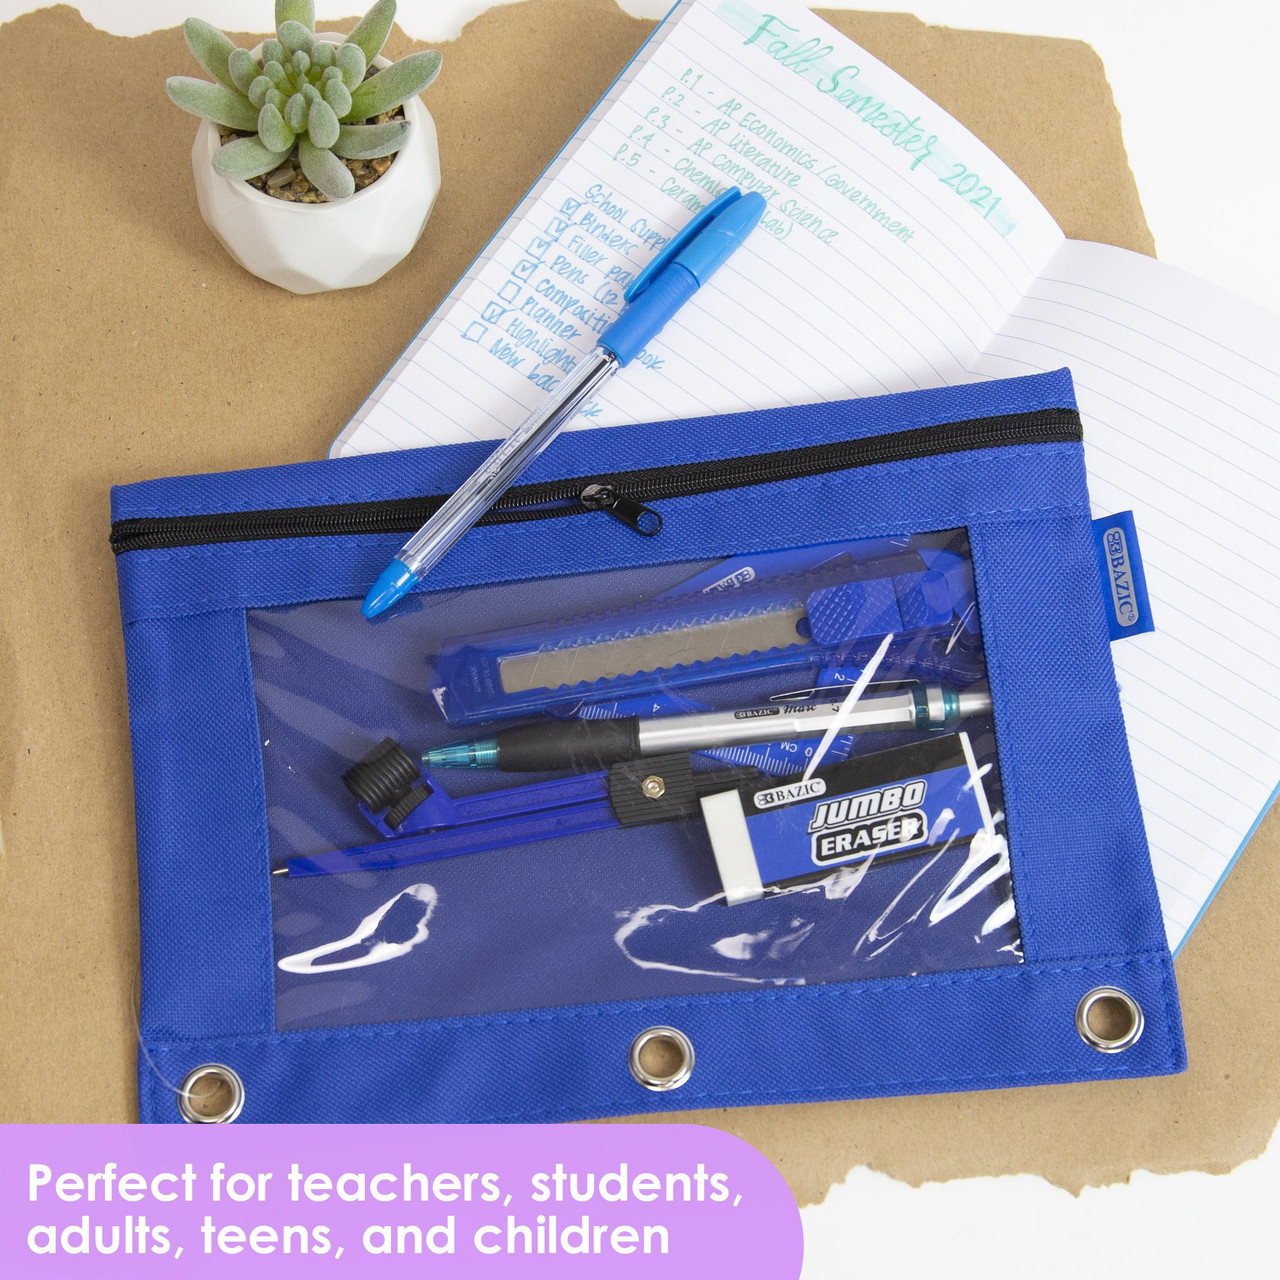 2-Pocket Pencil Pouch, Clear